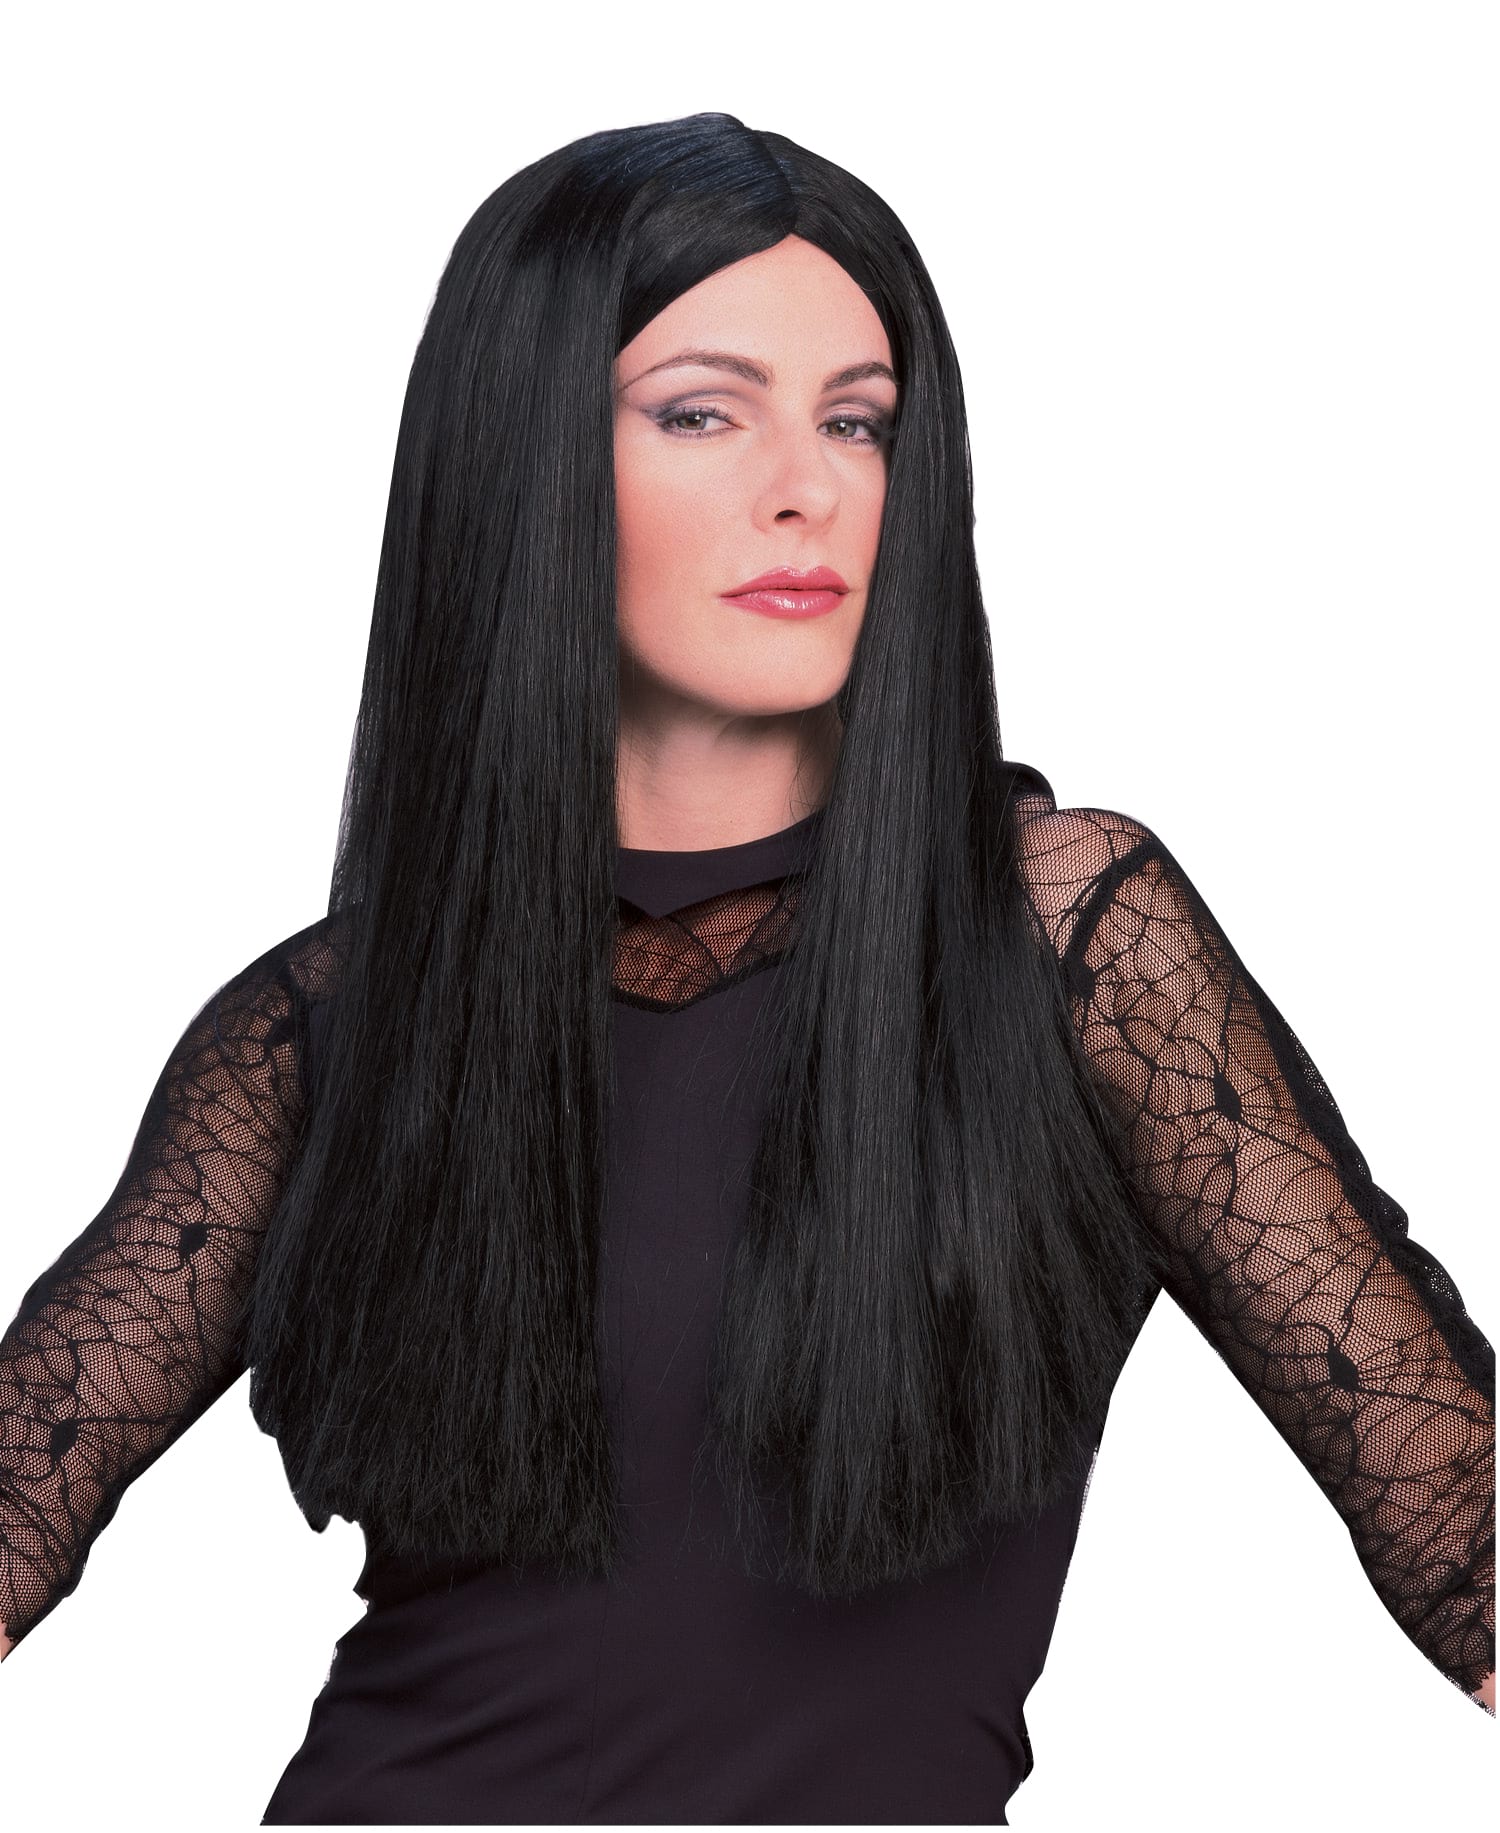 Transform into Morticia with Our Addams Family Inspired Wig